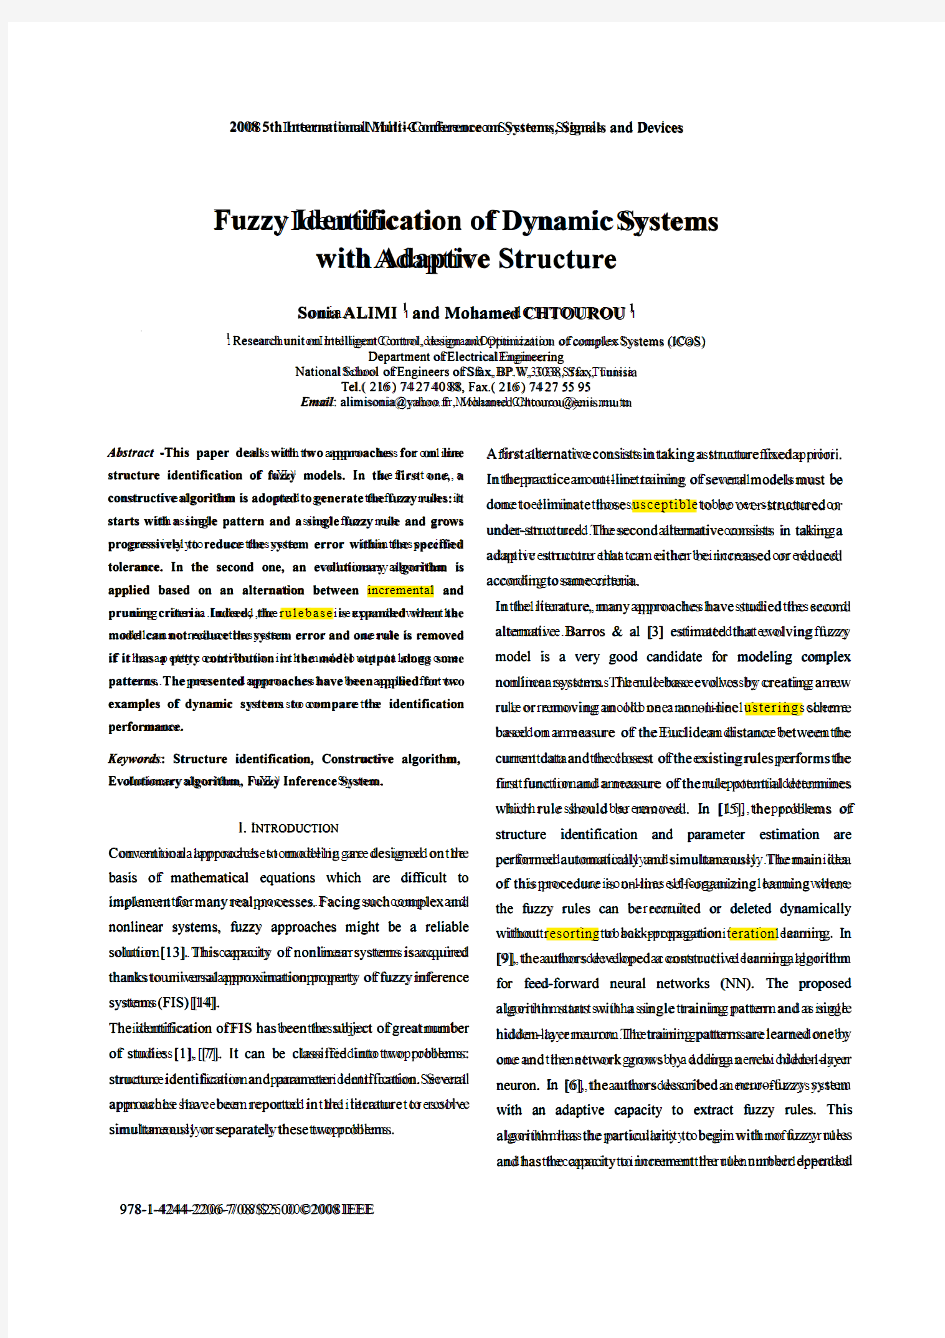 fuzzy identification of dynamic systems with adaptive structure